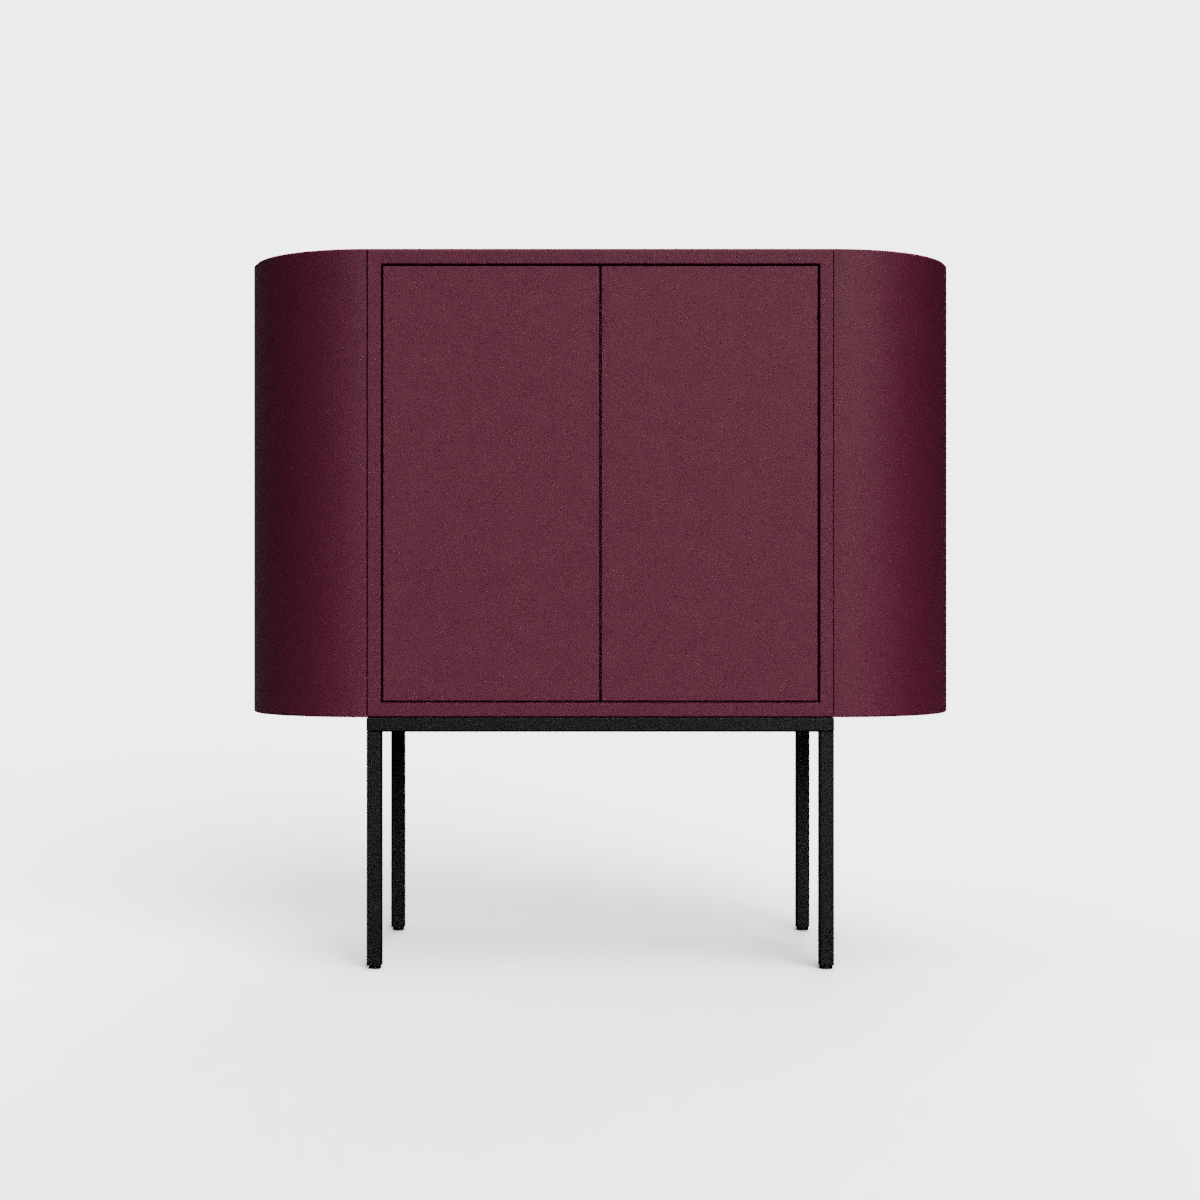 Siena 01 Sideboard in plum color, powder-coated steel, elegant and modern piece of furniture for your living room